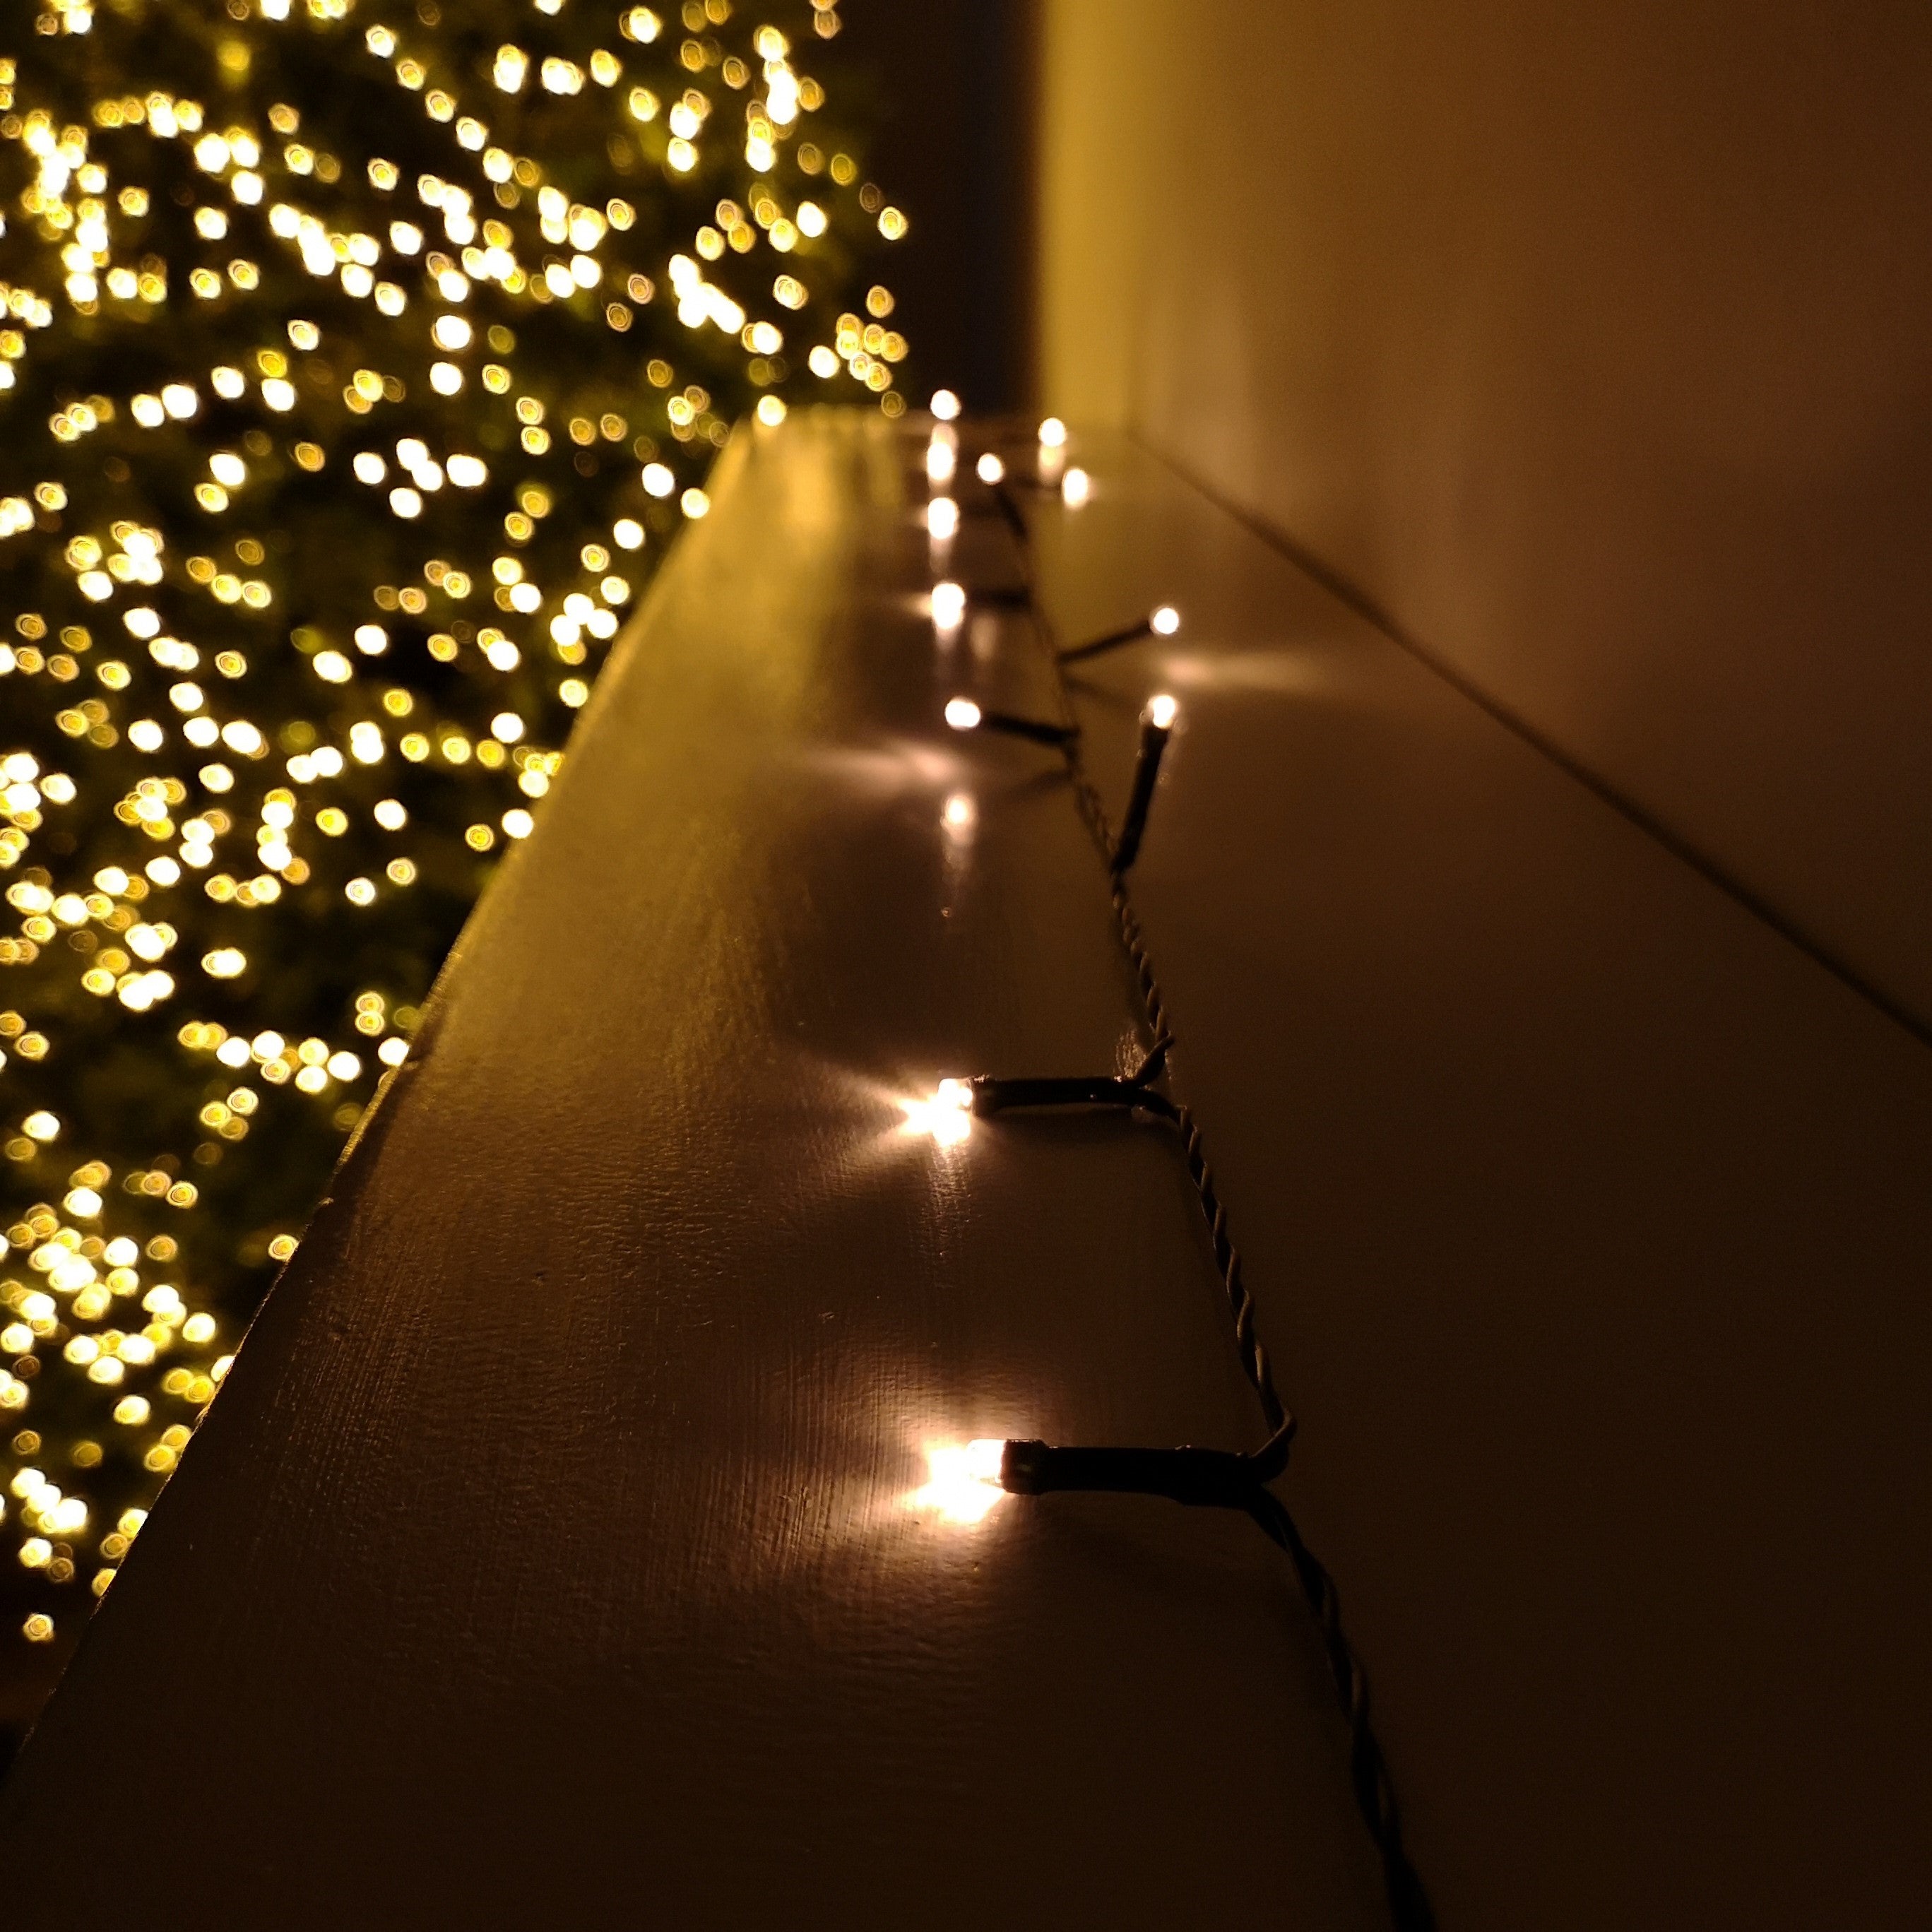 24 LED 2.3m Premier Christmas Indoor Outdoor Multi Function Battery Operated String Lights with Timer in Vintage Gold